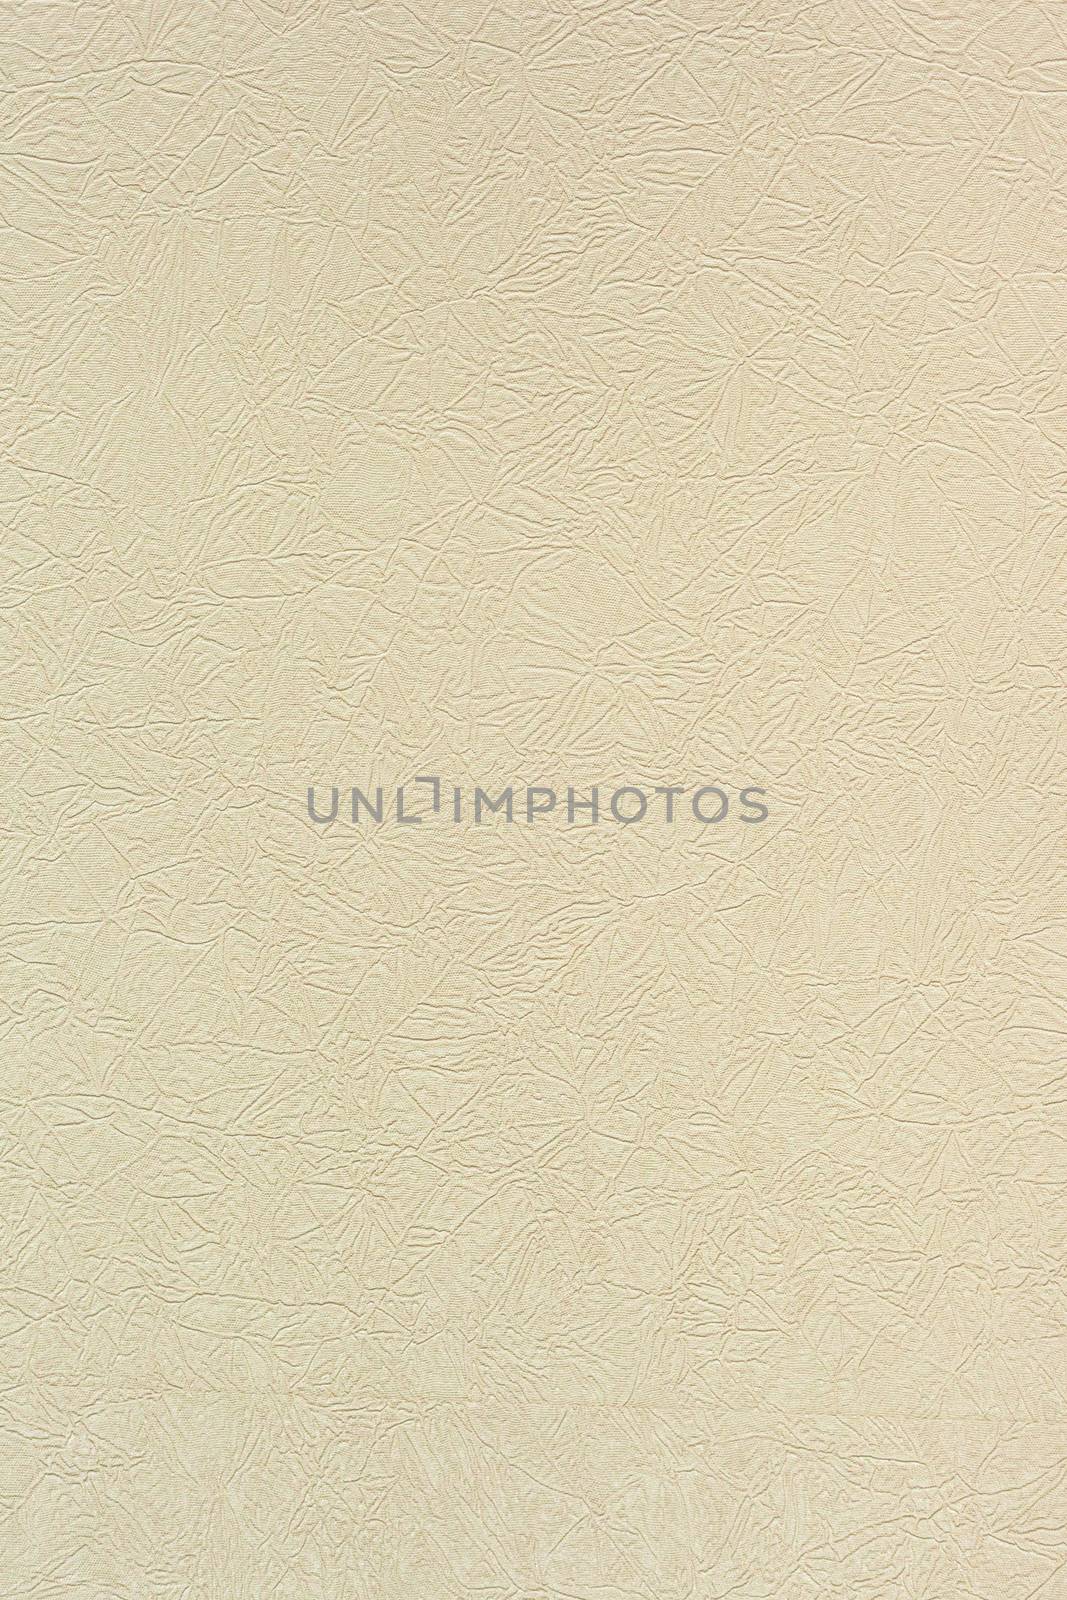 Yellow Ivory Artificial Leather Background Texture